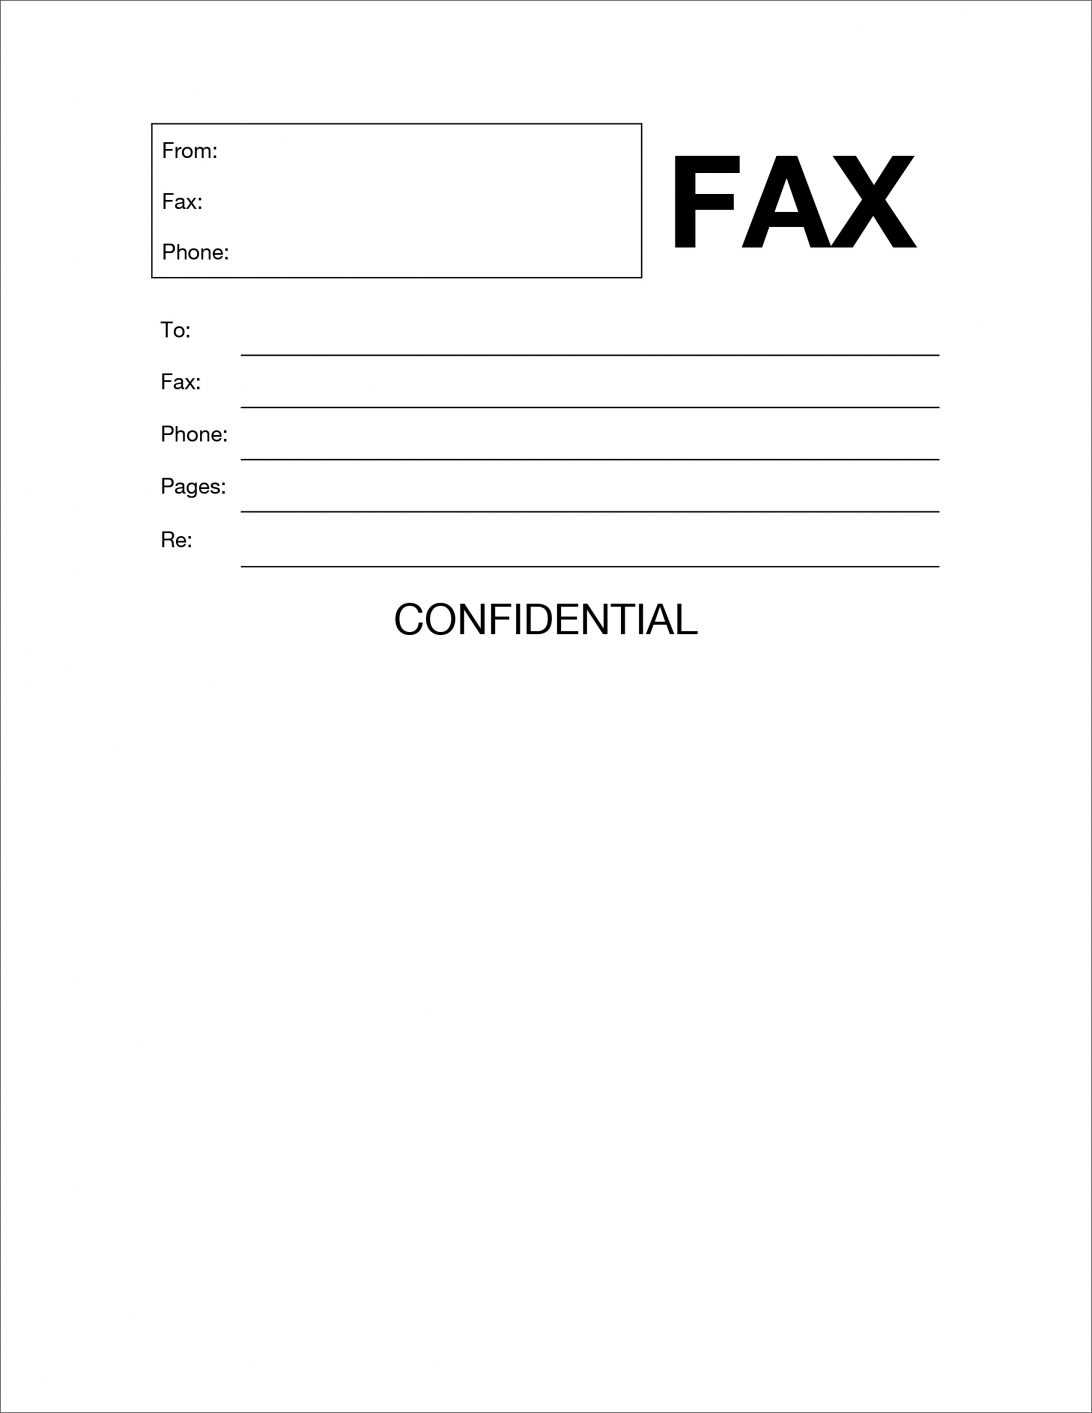 How To Create A Fax Cover Sheet In Microsoft Word 2007 Regarding Fax Template Word 2010